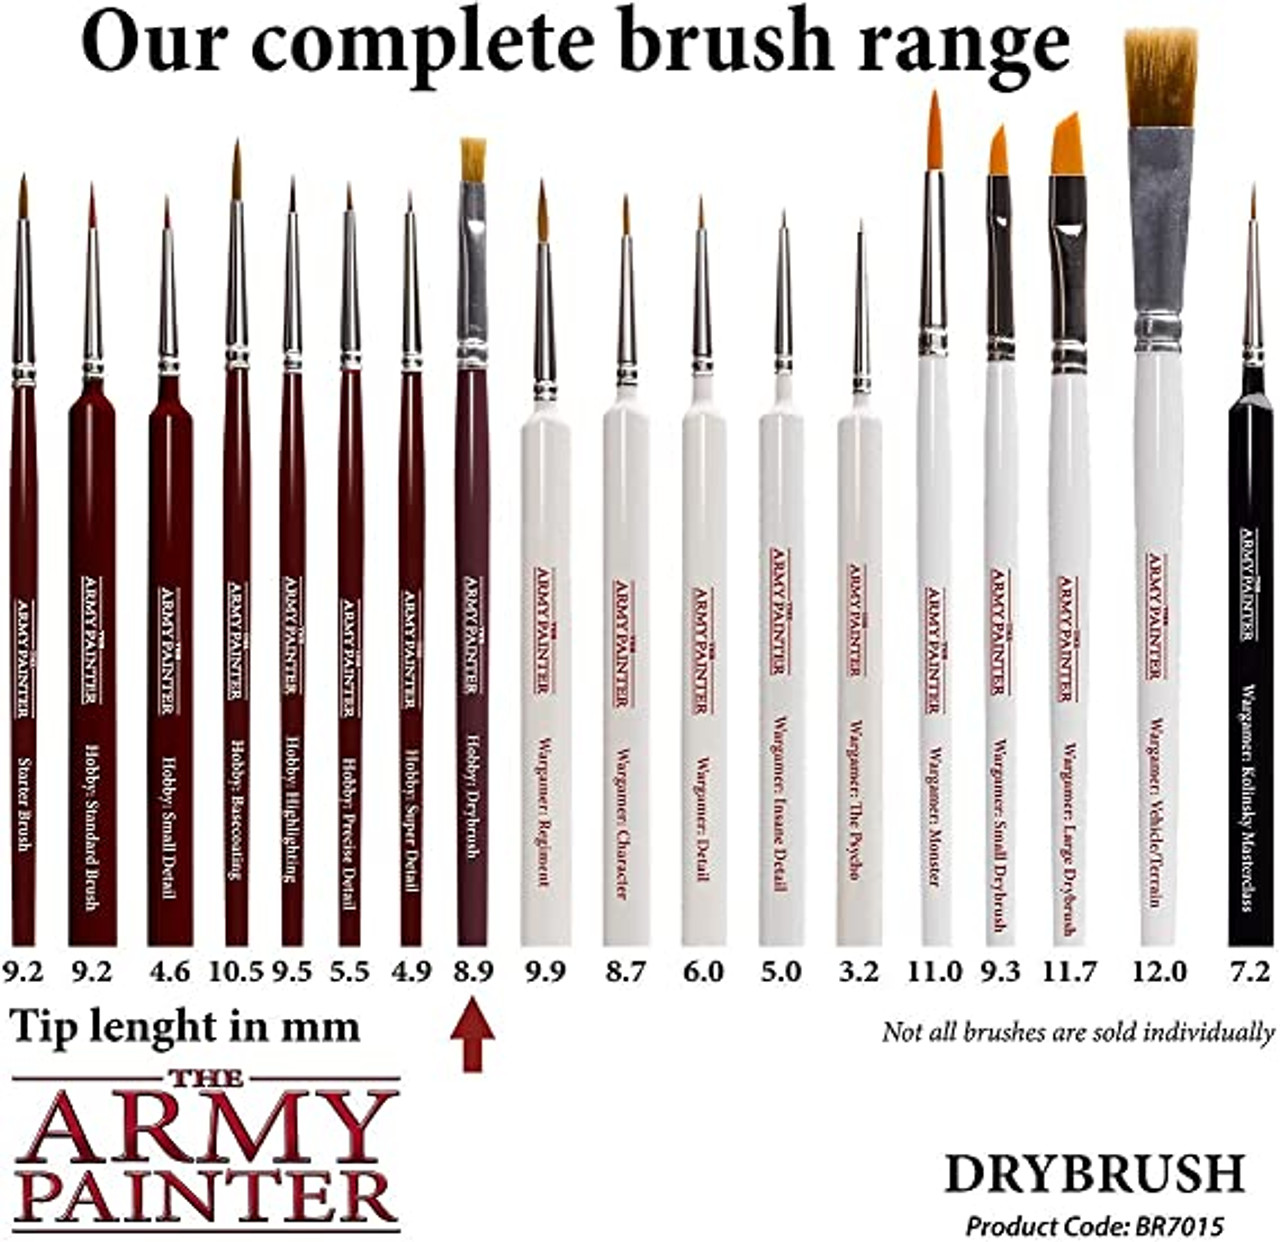 Army Painter TL5054 Master Class Drybrush Set (Brushes) Miniature Painting  Tools